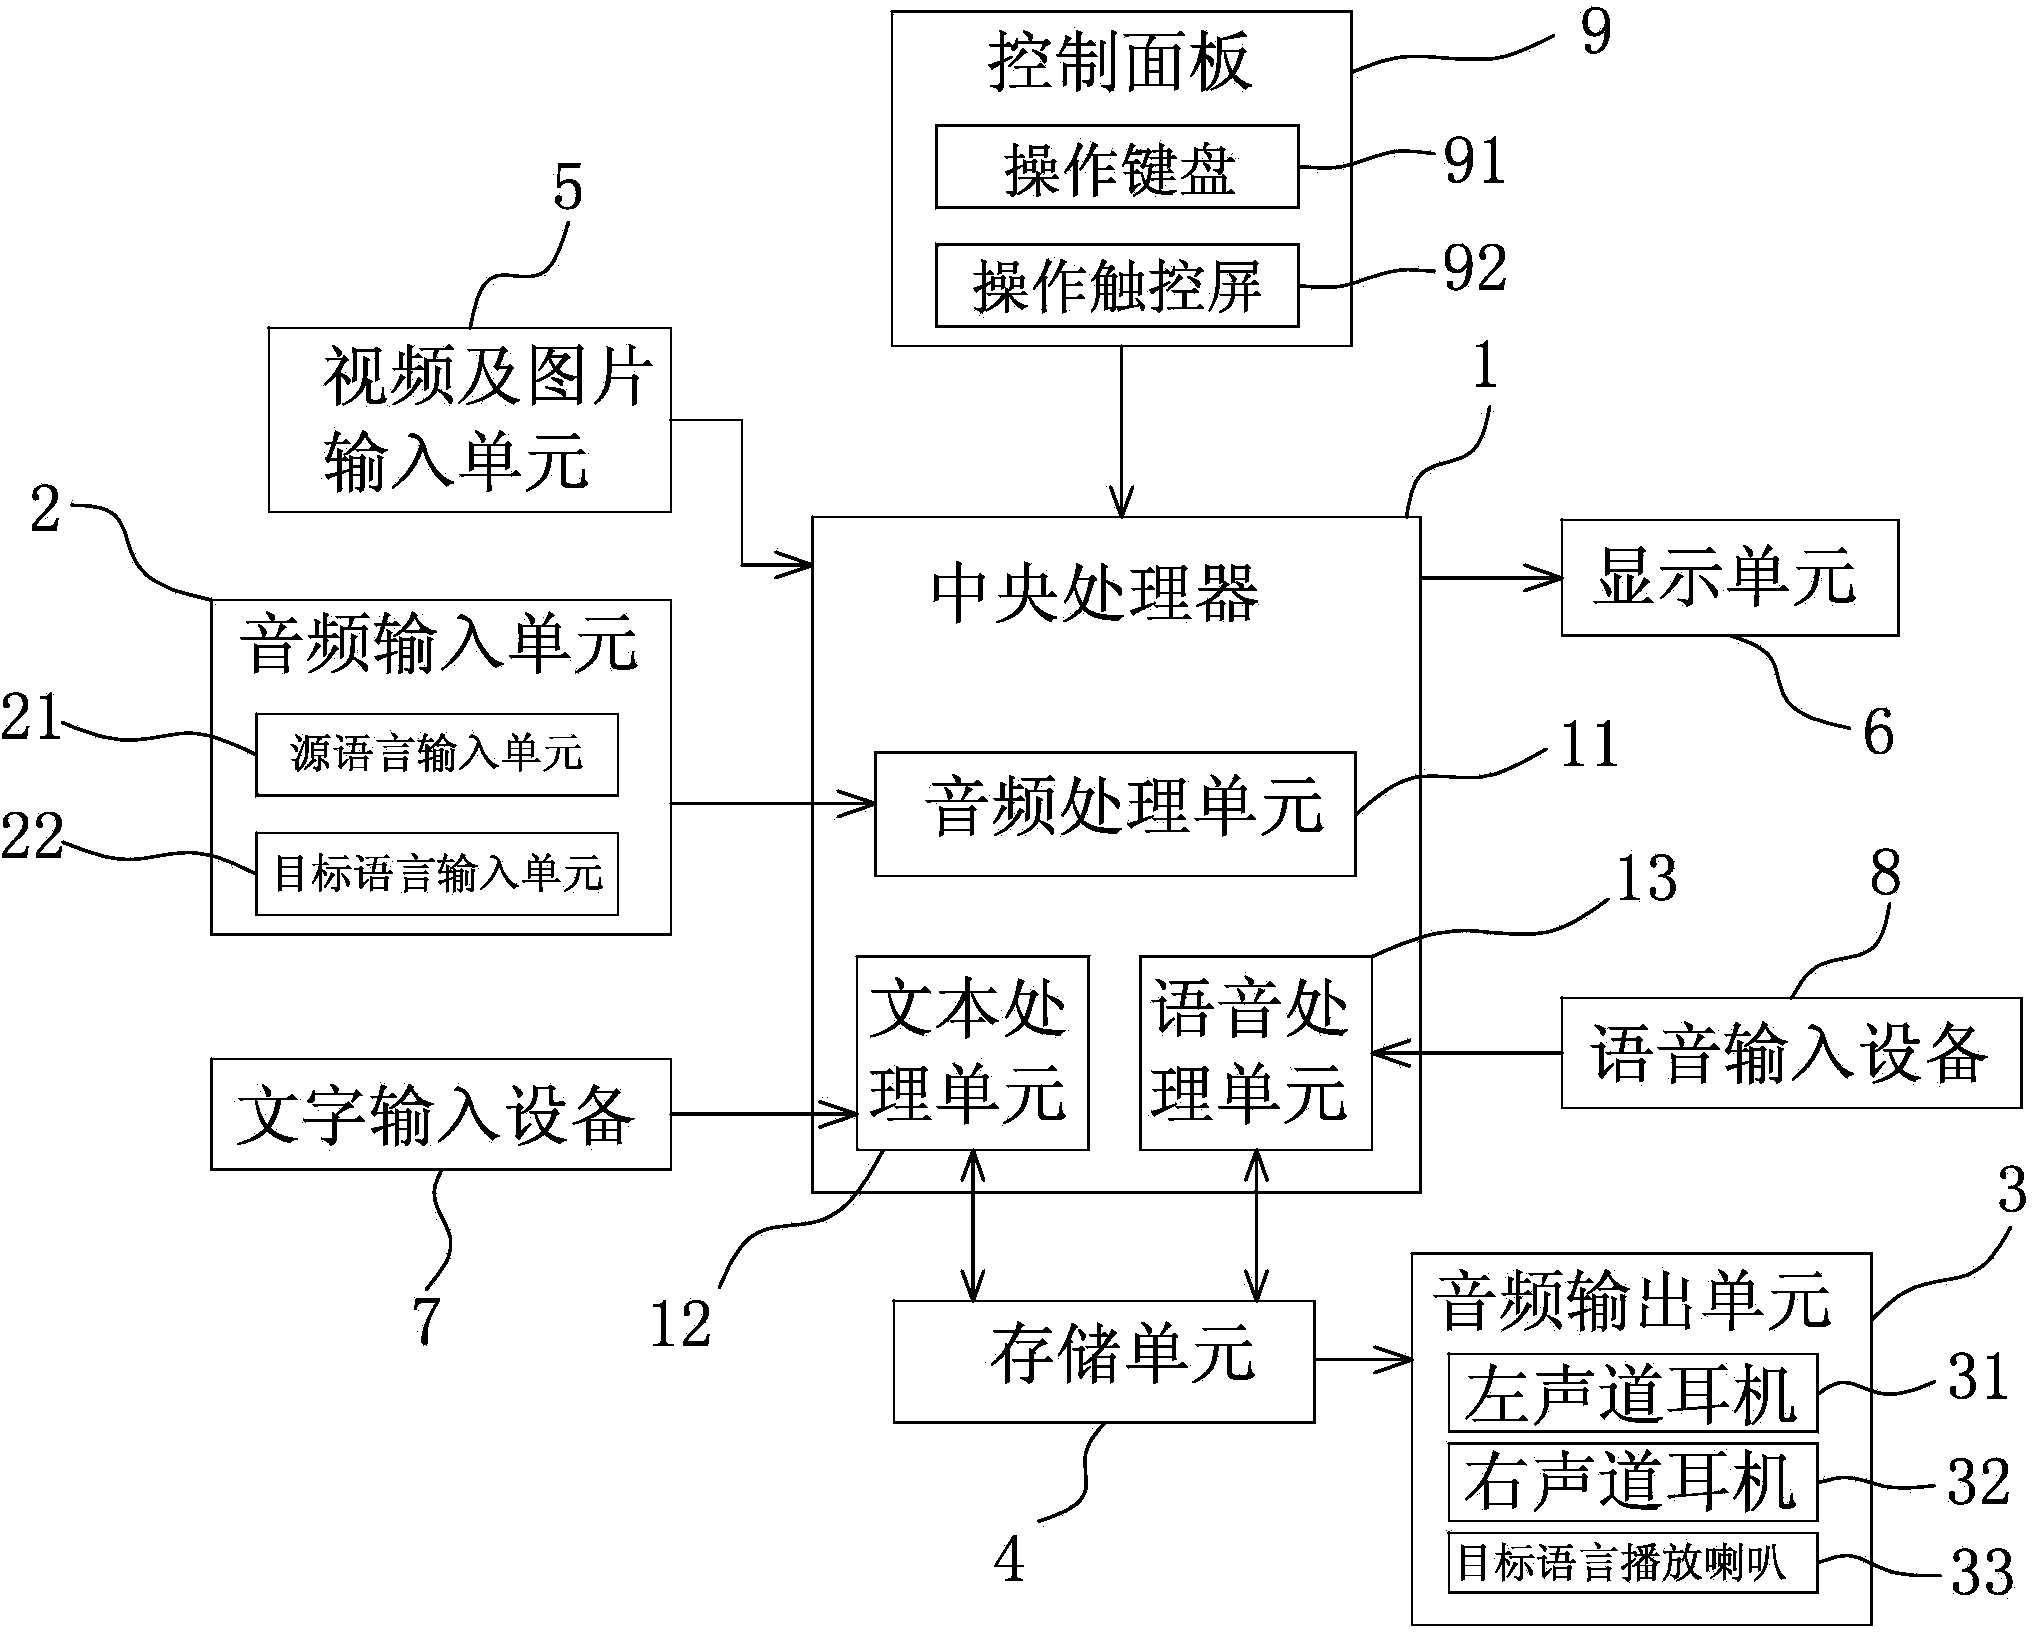 Multi-information synchronous encoding and learning device and method